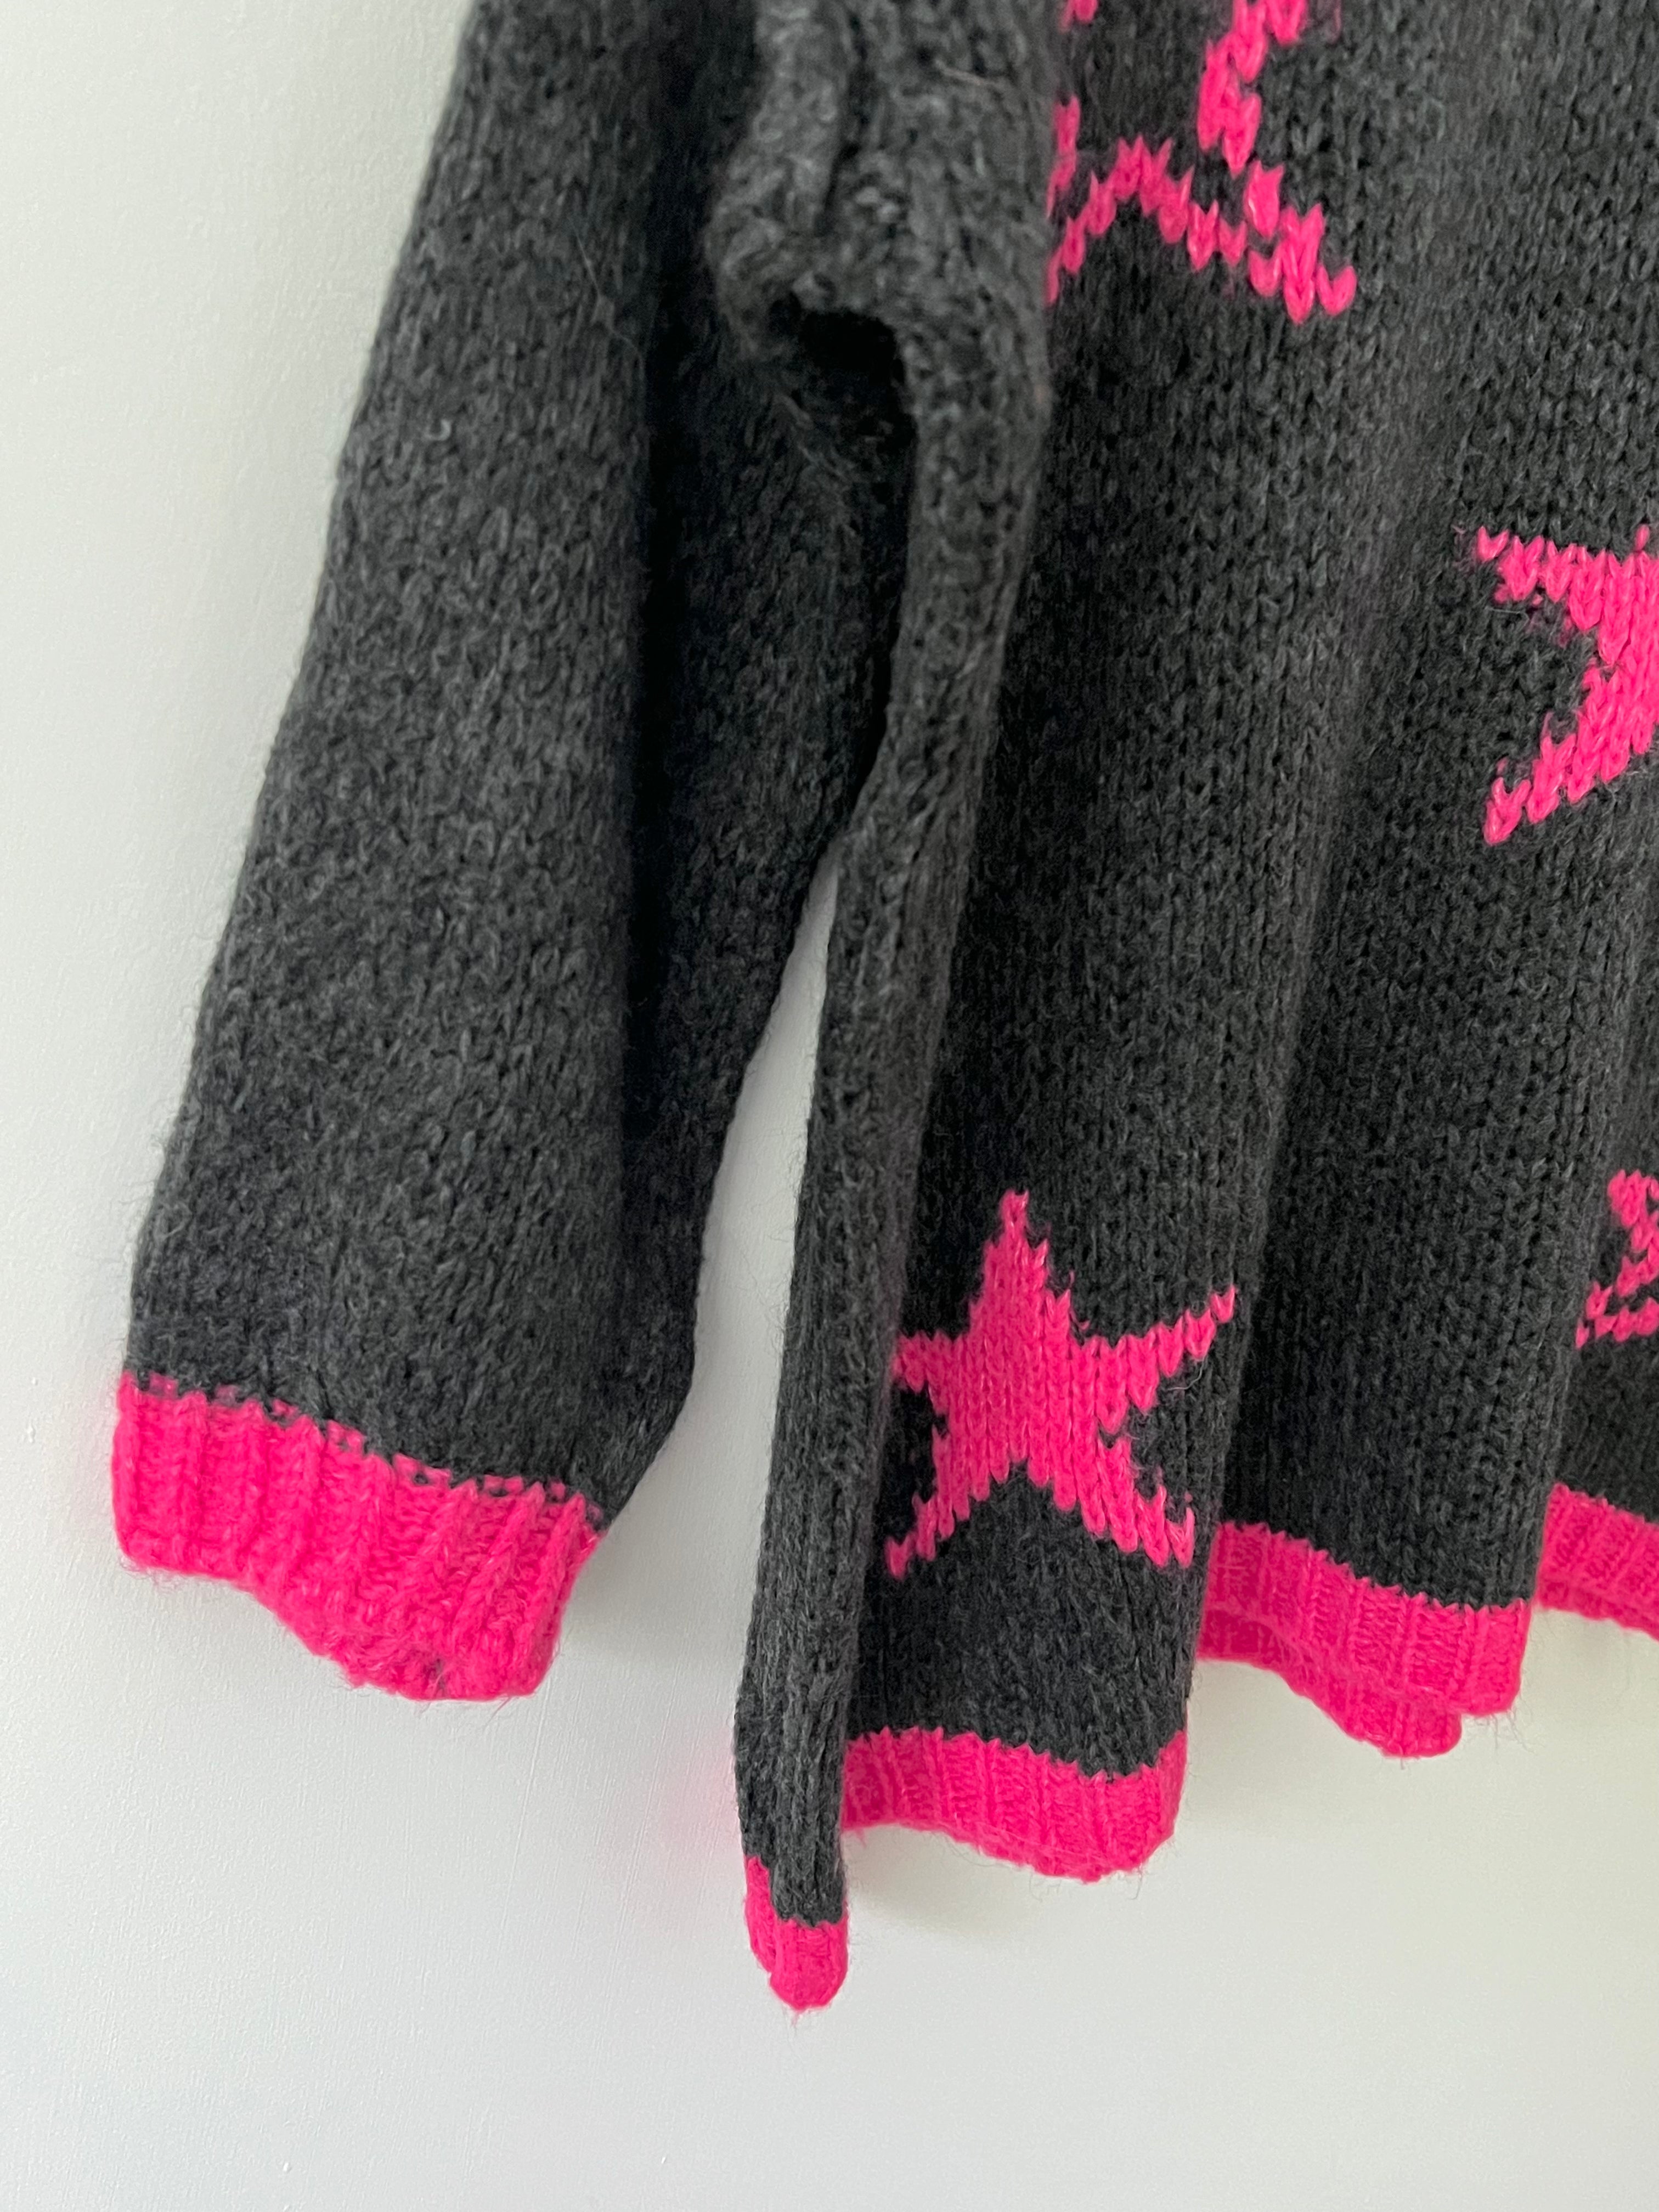 Multi Star Jumper in Charcoal & Pink